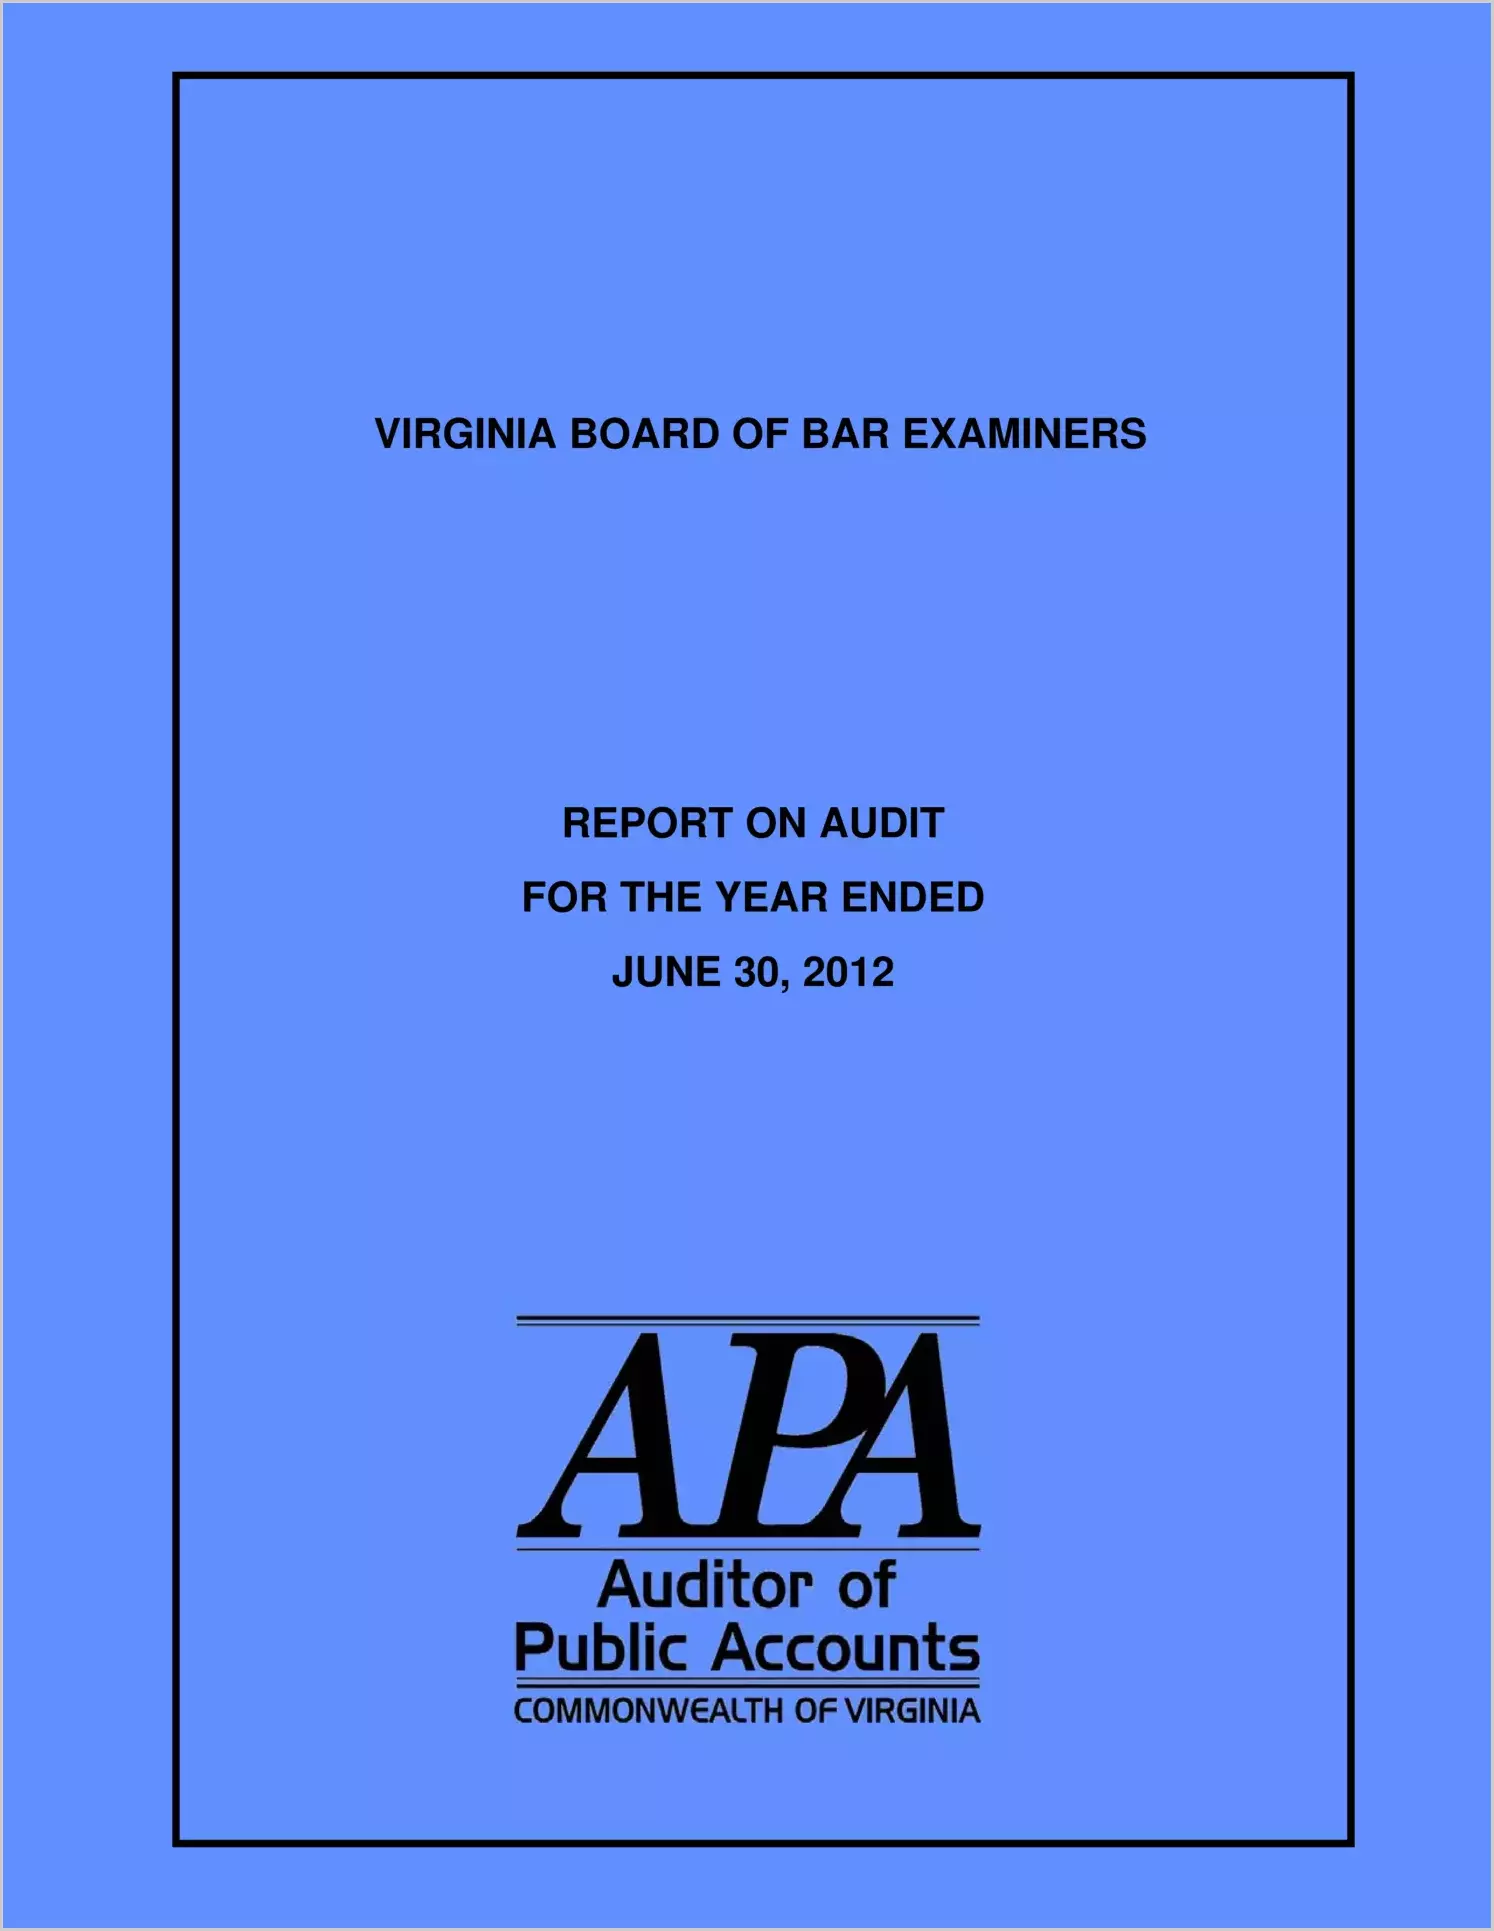 Virginia Board of Bar Examiners Report on Audit for the Year Ended June 30, 2012